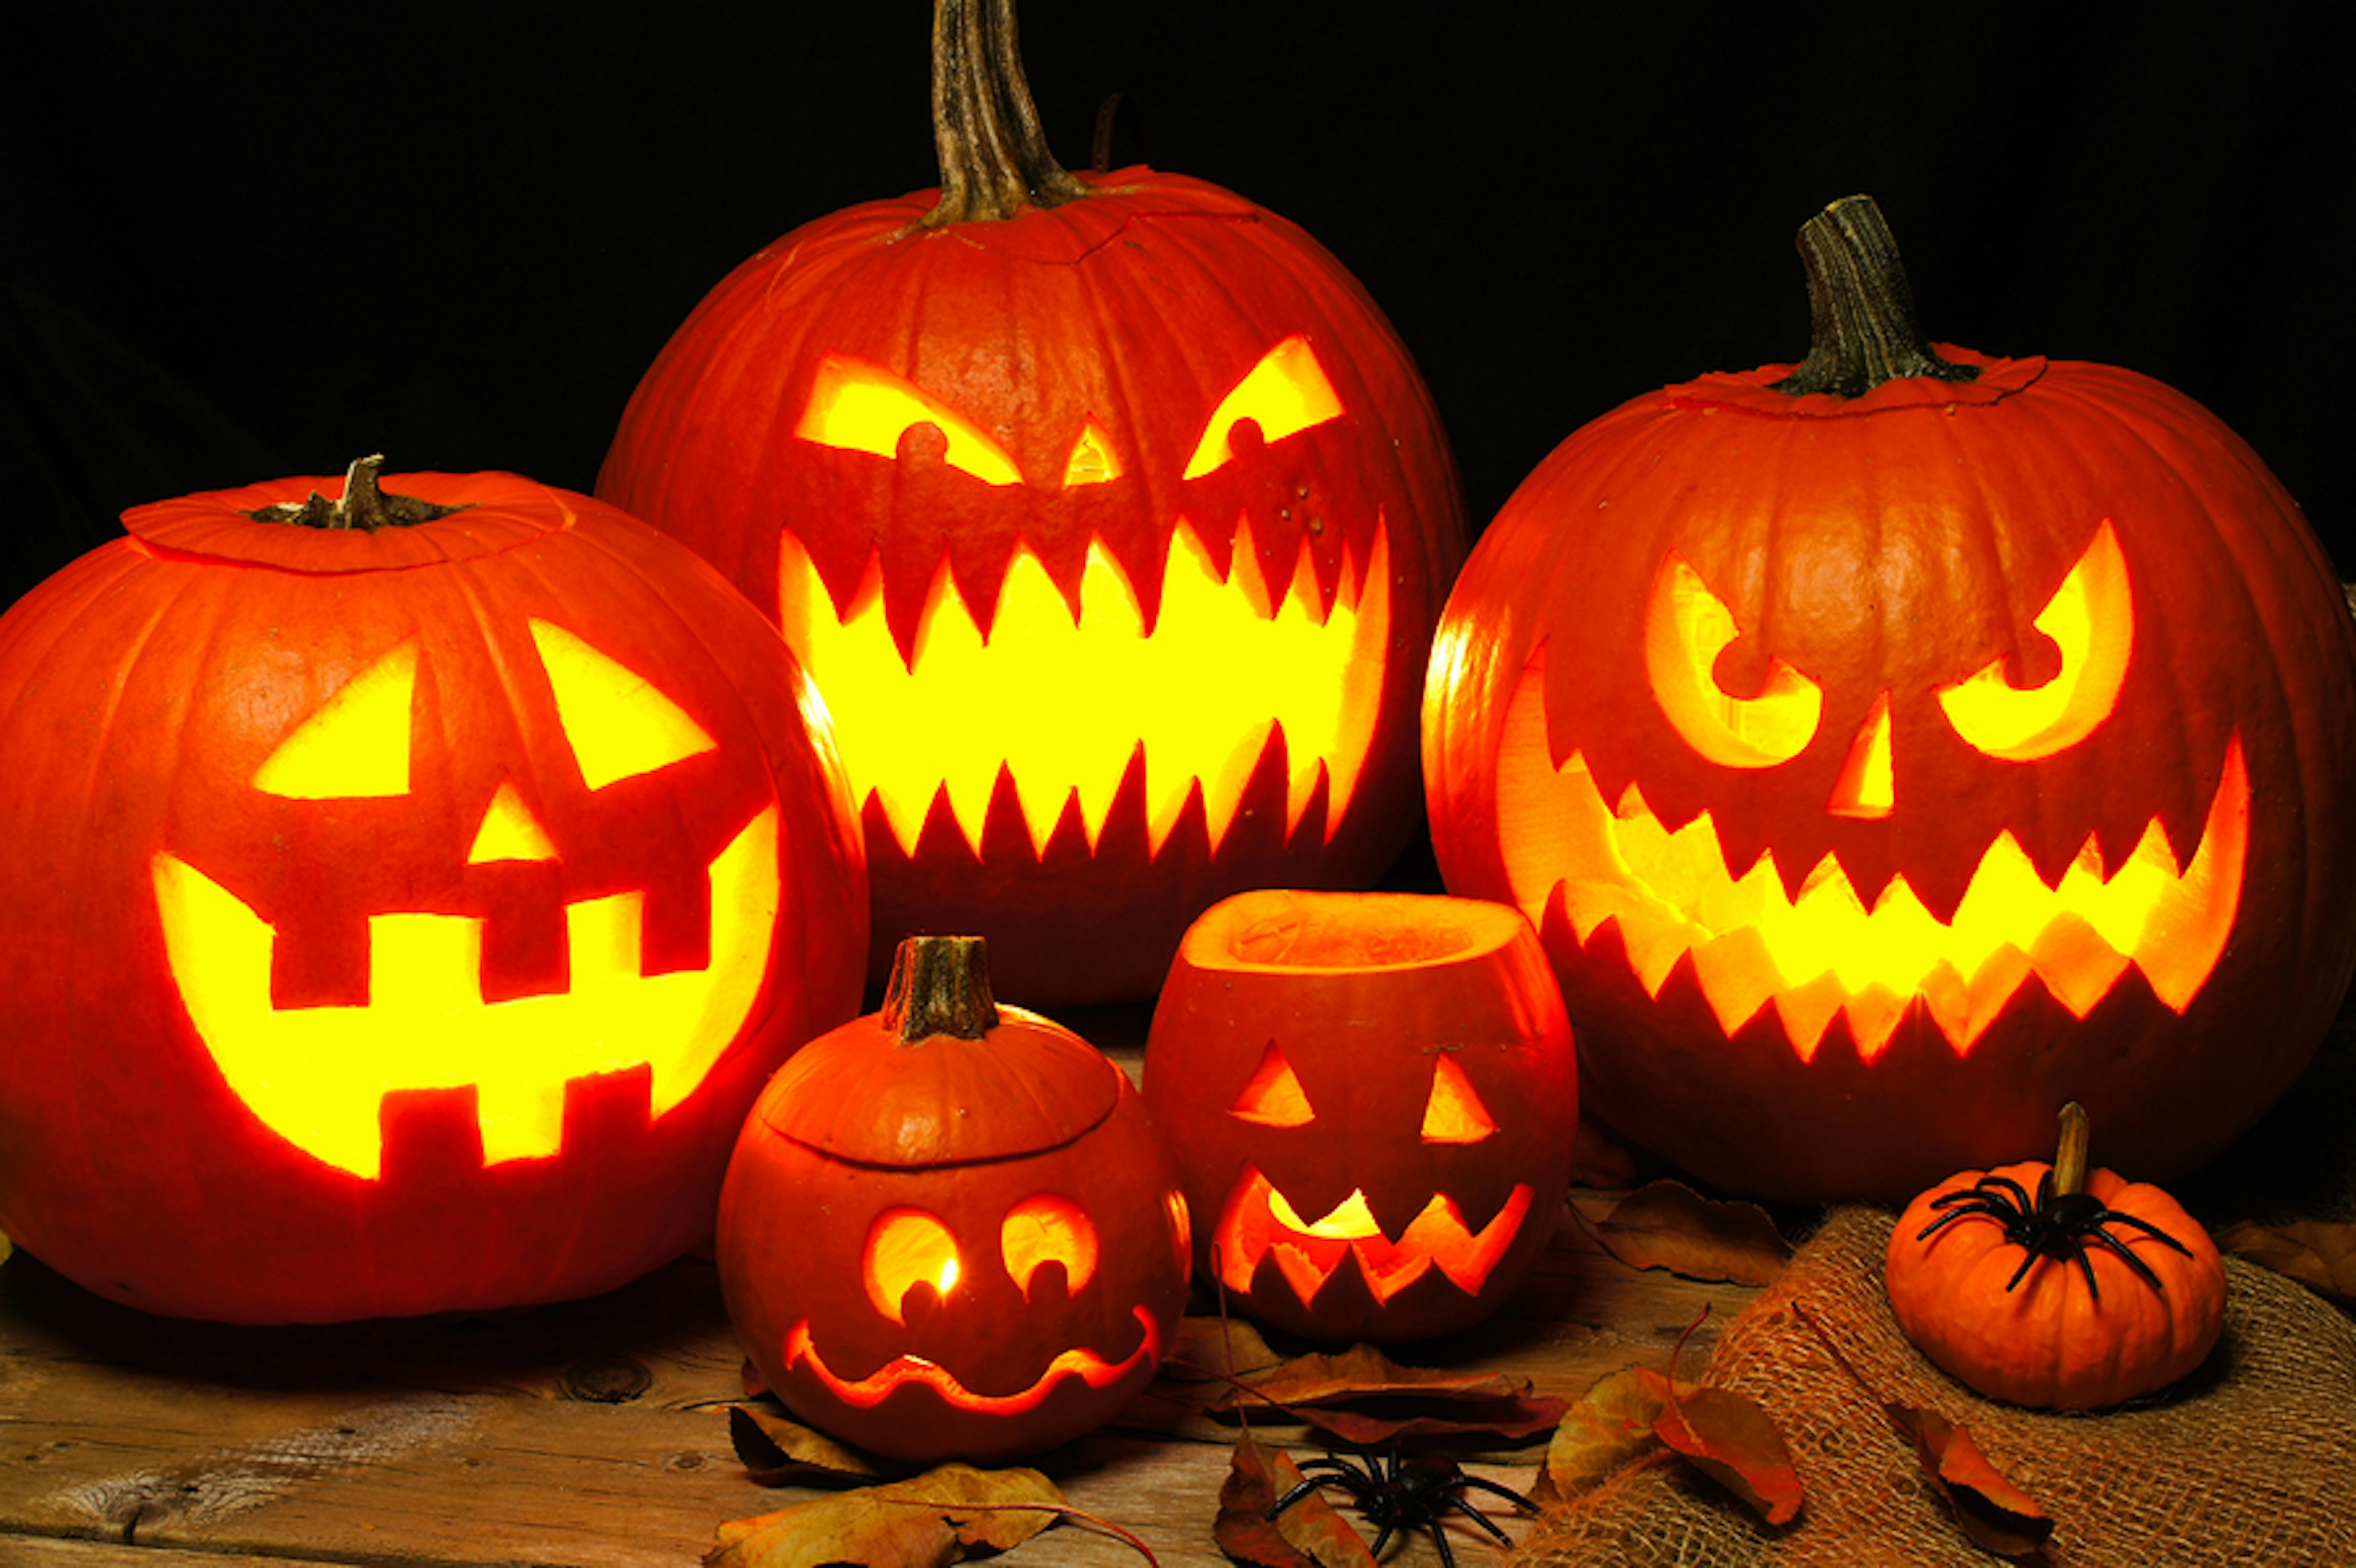 Small Business Presence on Social Media? More Frightening than Halloween!